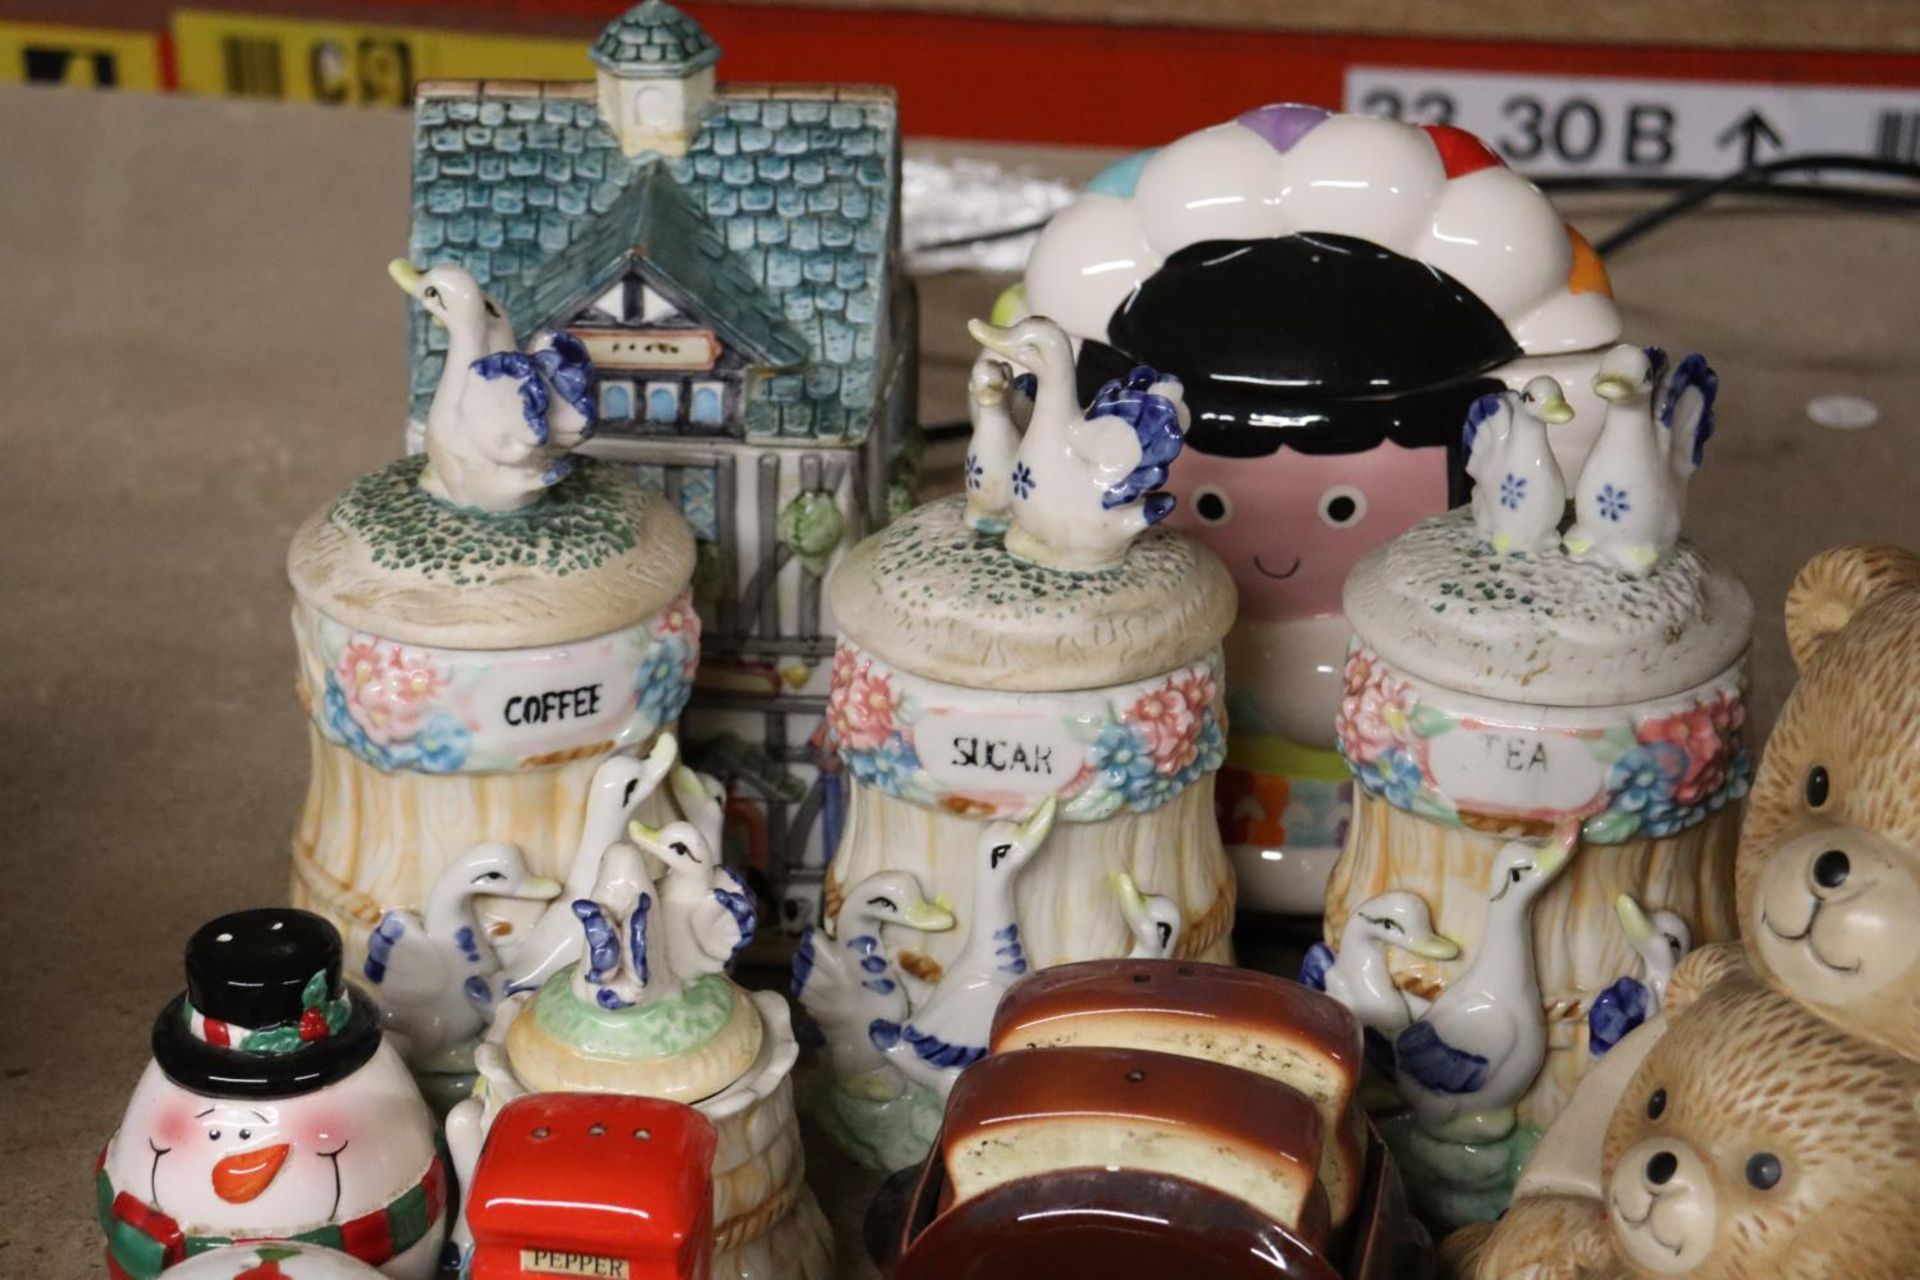 A COLLECTION OF NOVELTY CRUET SETS AND STORAGE JARS - Image 2 of 5